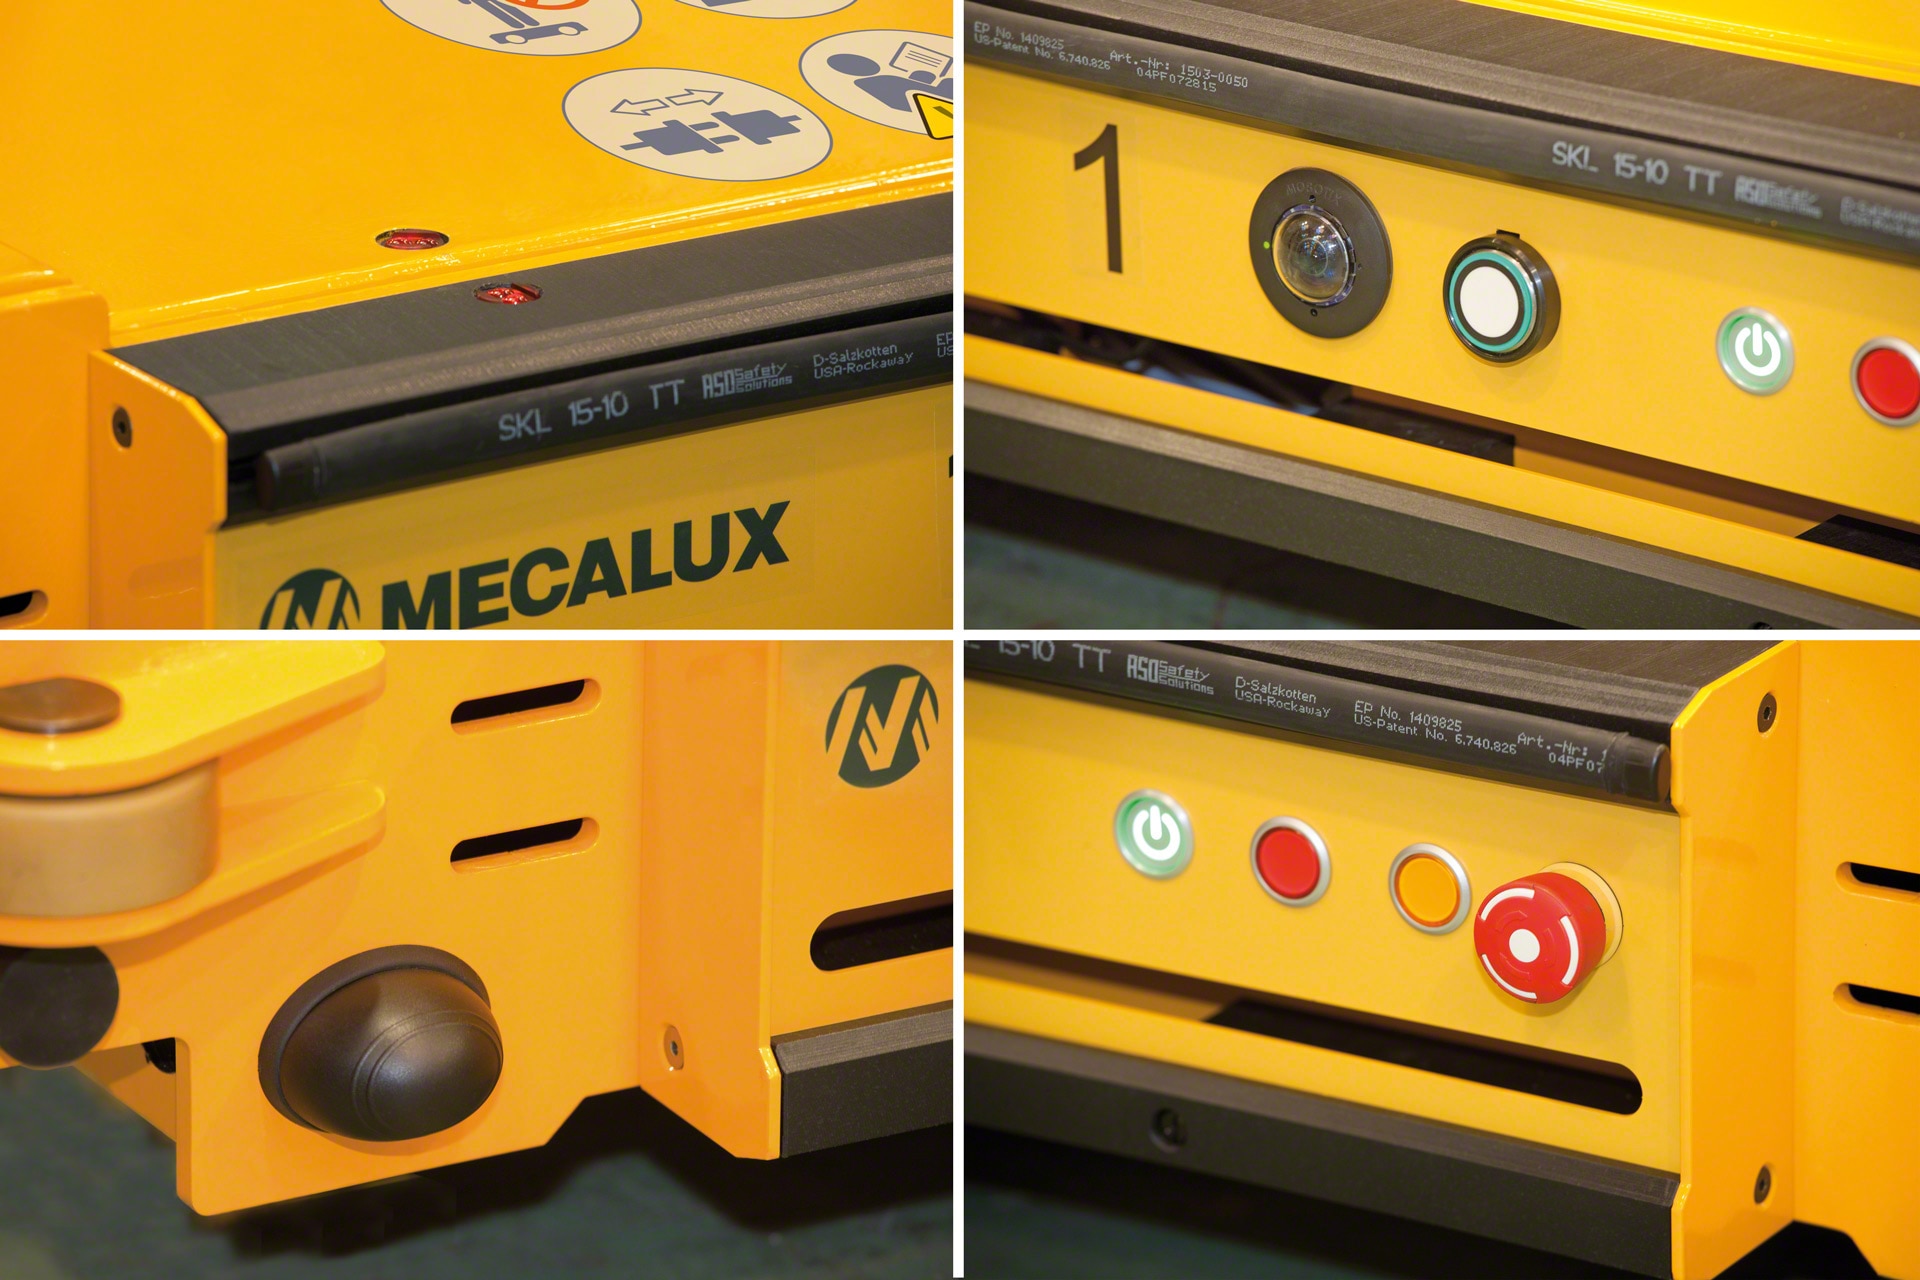 The Pallet Shuttle has multiple safety options: Bumpers, E-stop button, Safety Scanner and Camera